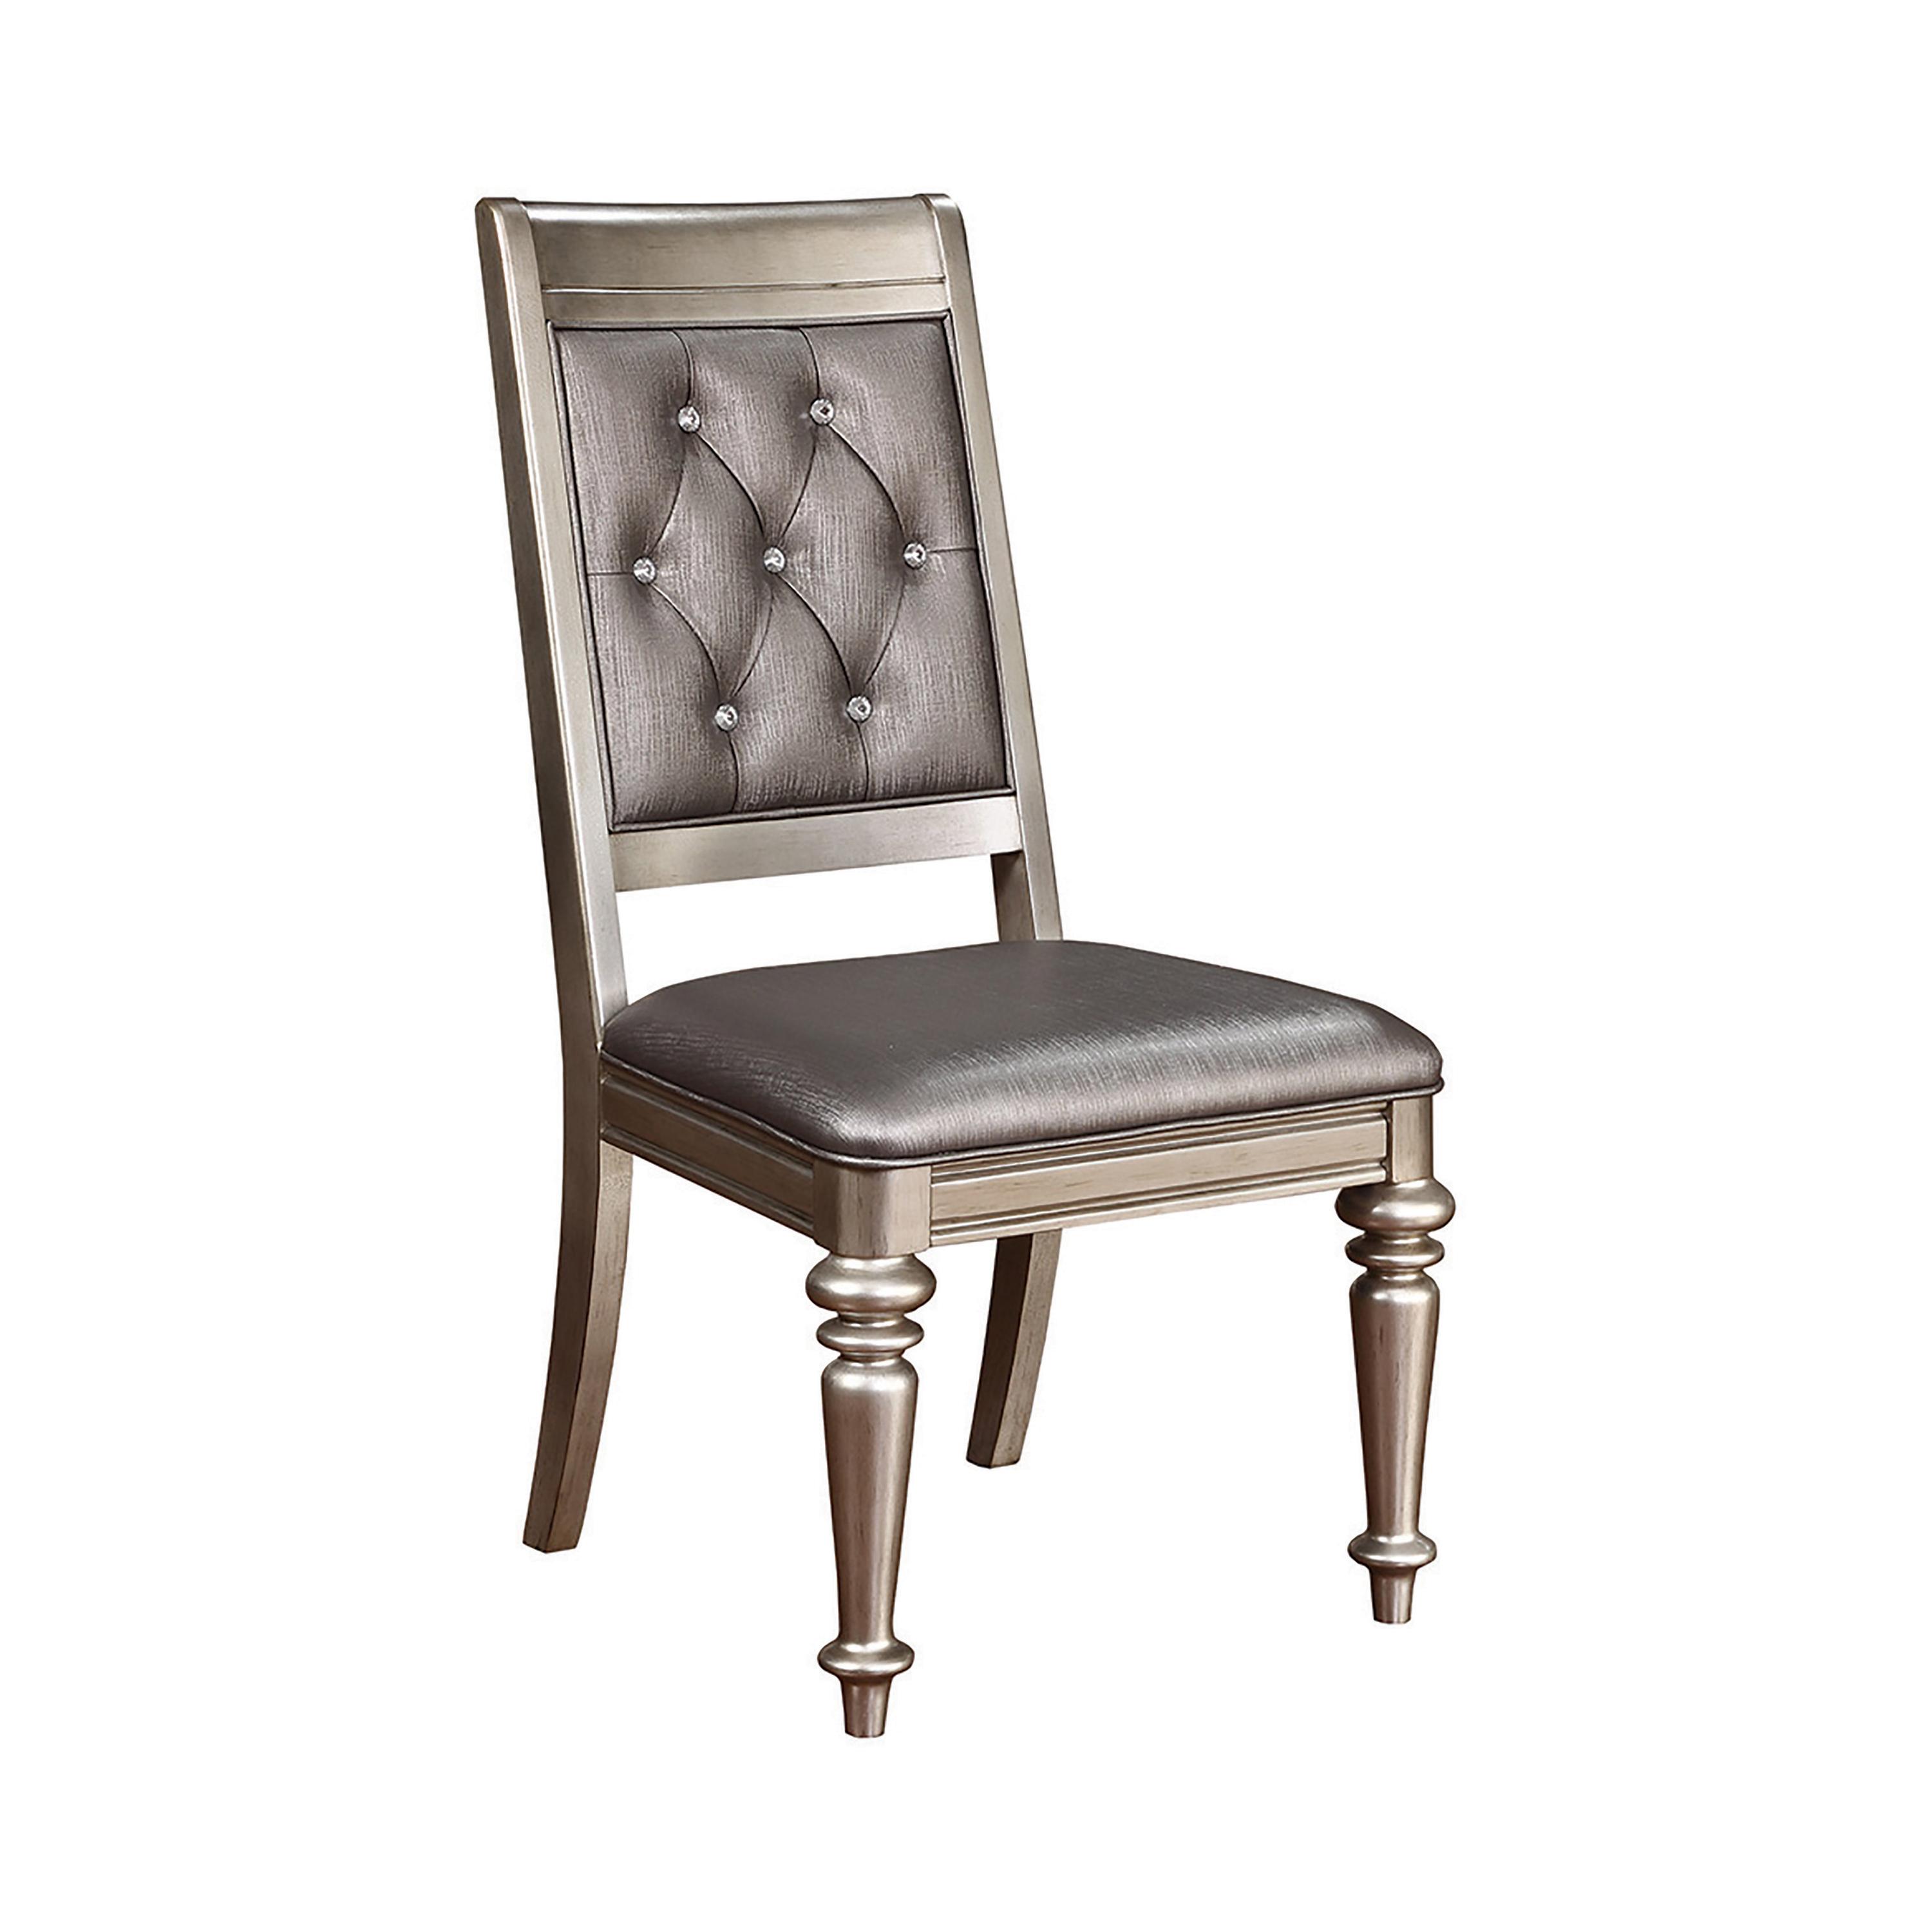 Contemporary Side Chair Set 106472 Danette 106472 in Platinum Leatherette